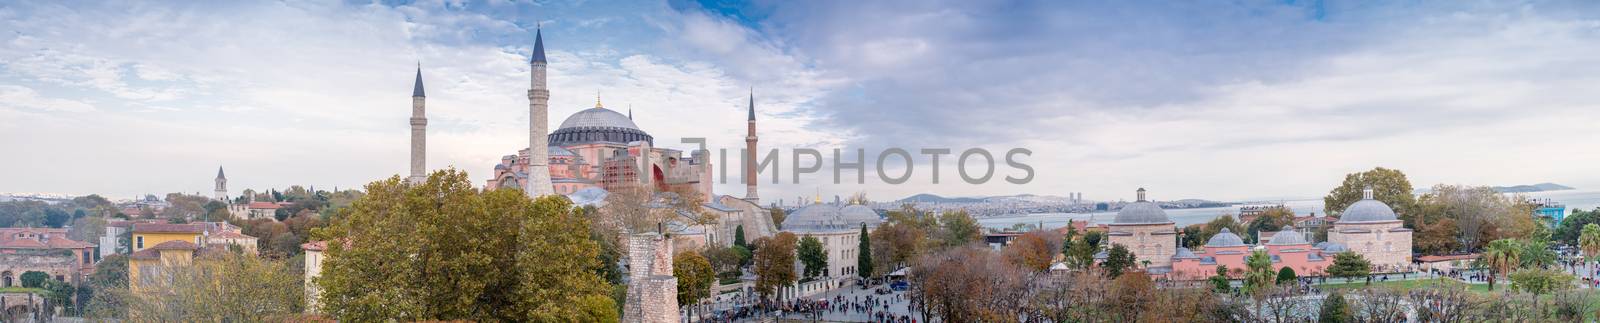 Panoramic aerial view of Hagia Sophia in Istanbul by jovannig